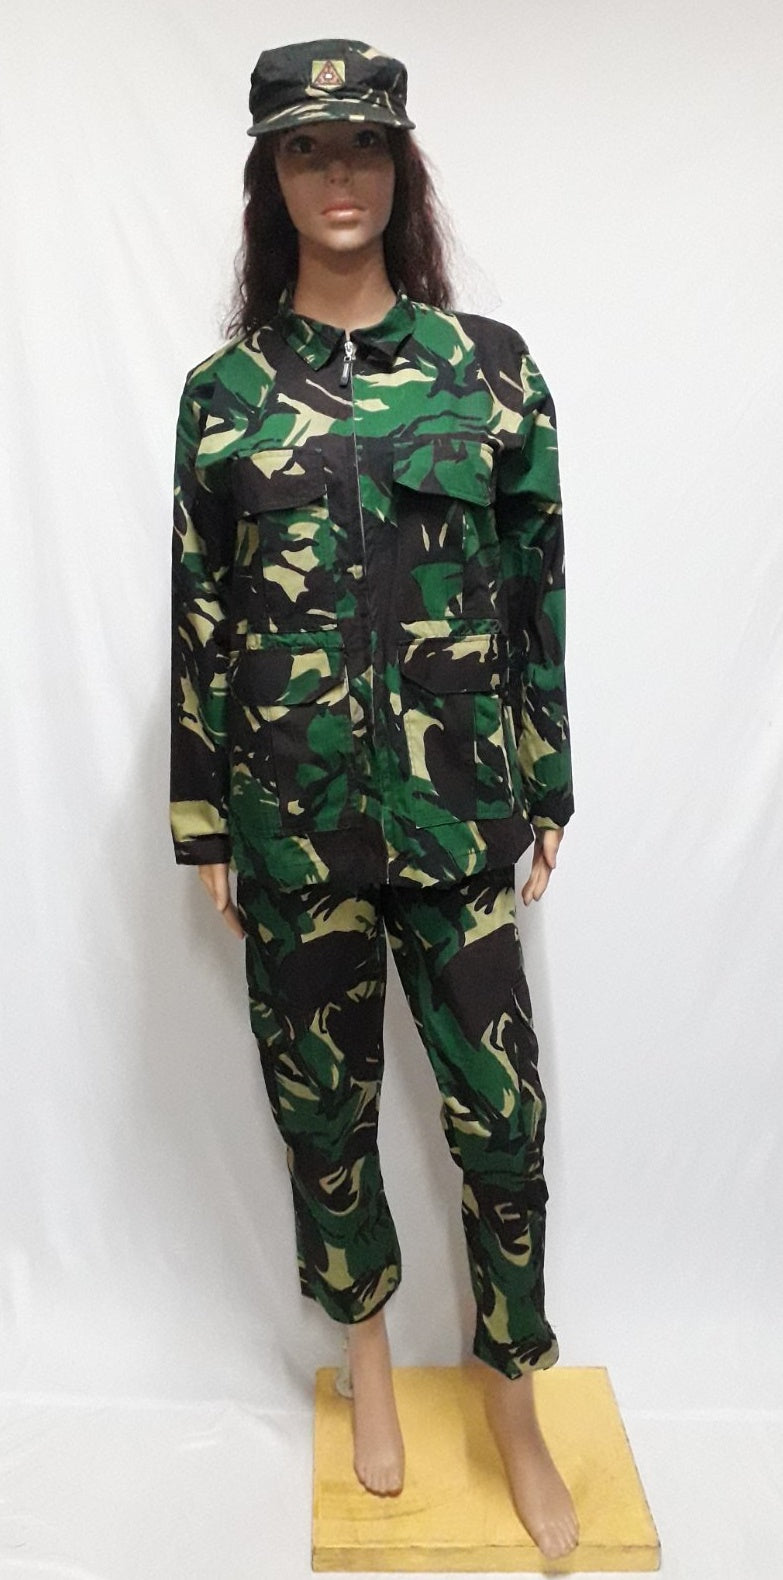 Army Camouflage Costume 1